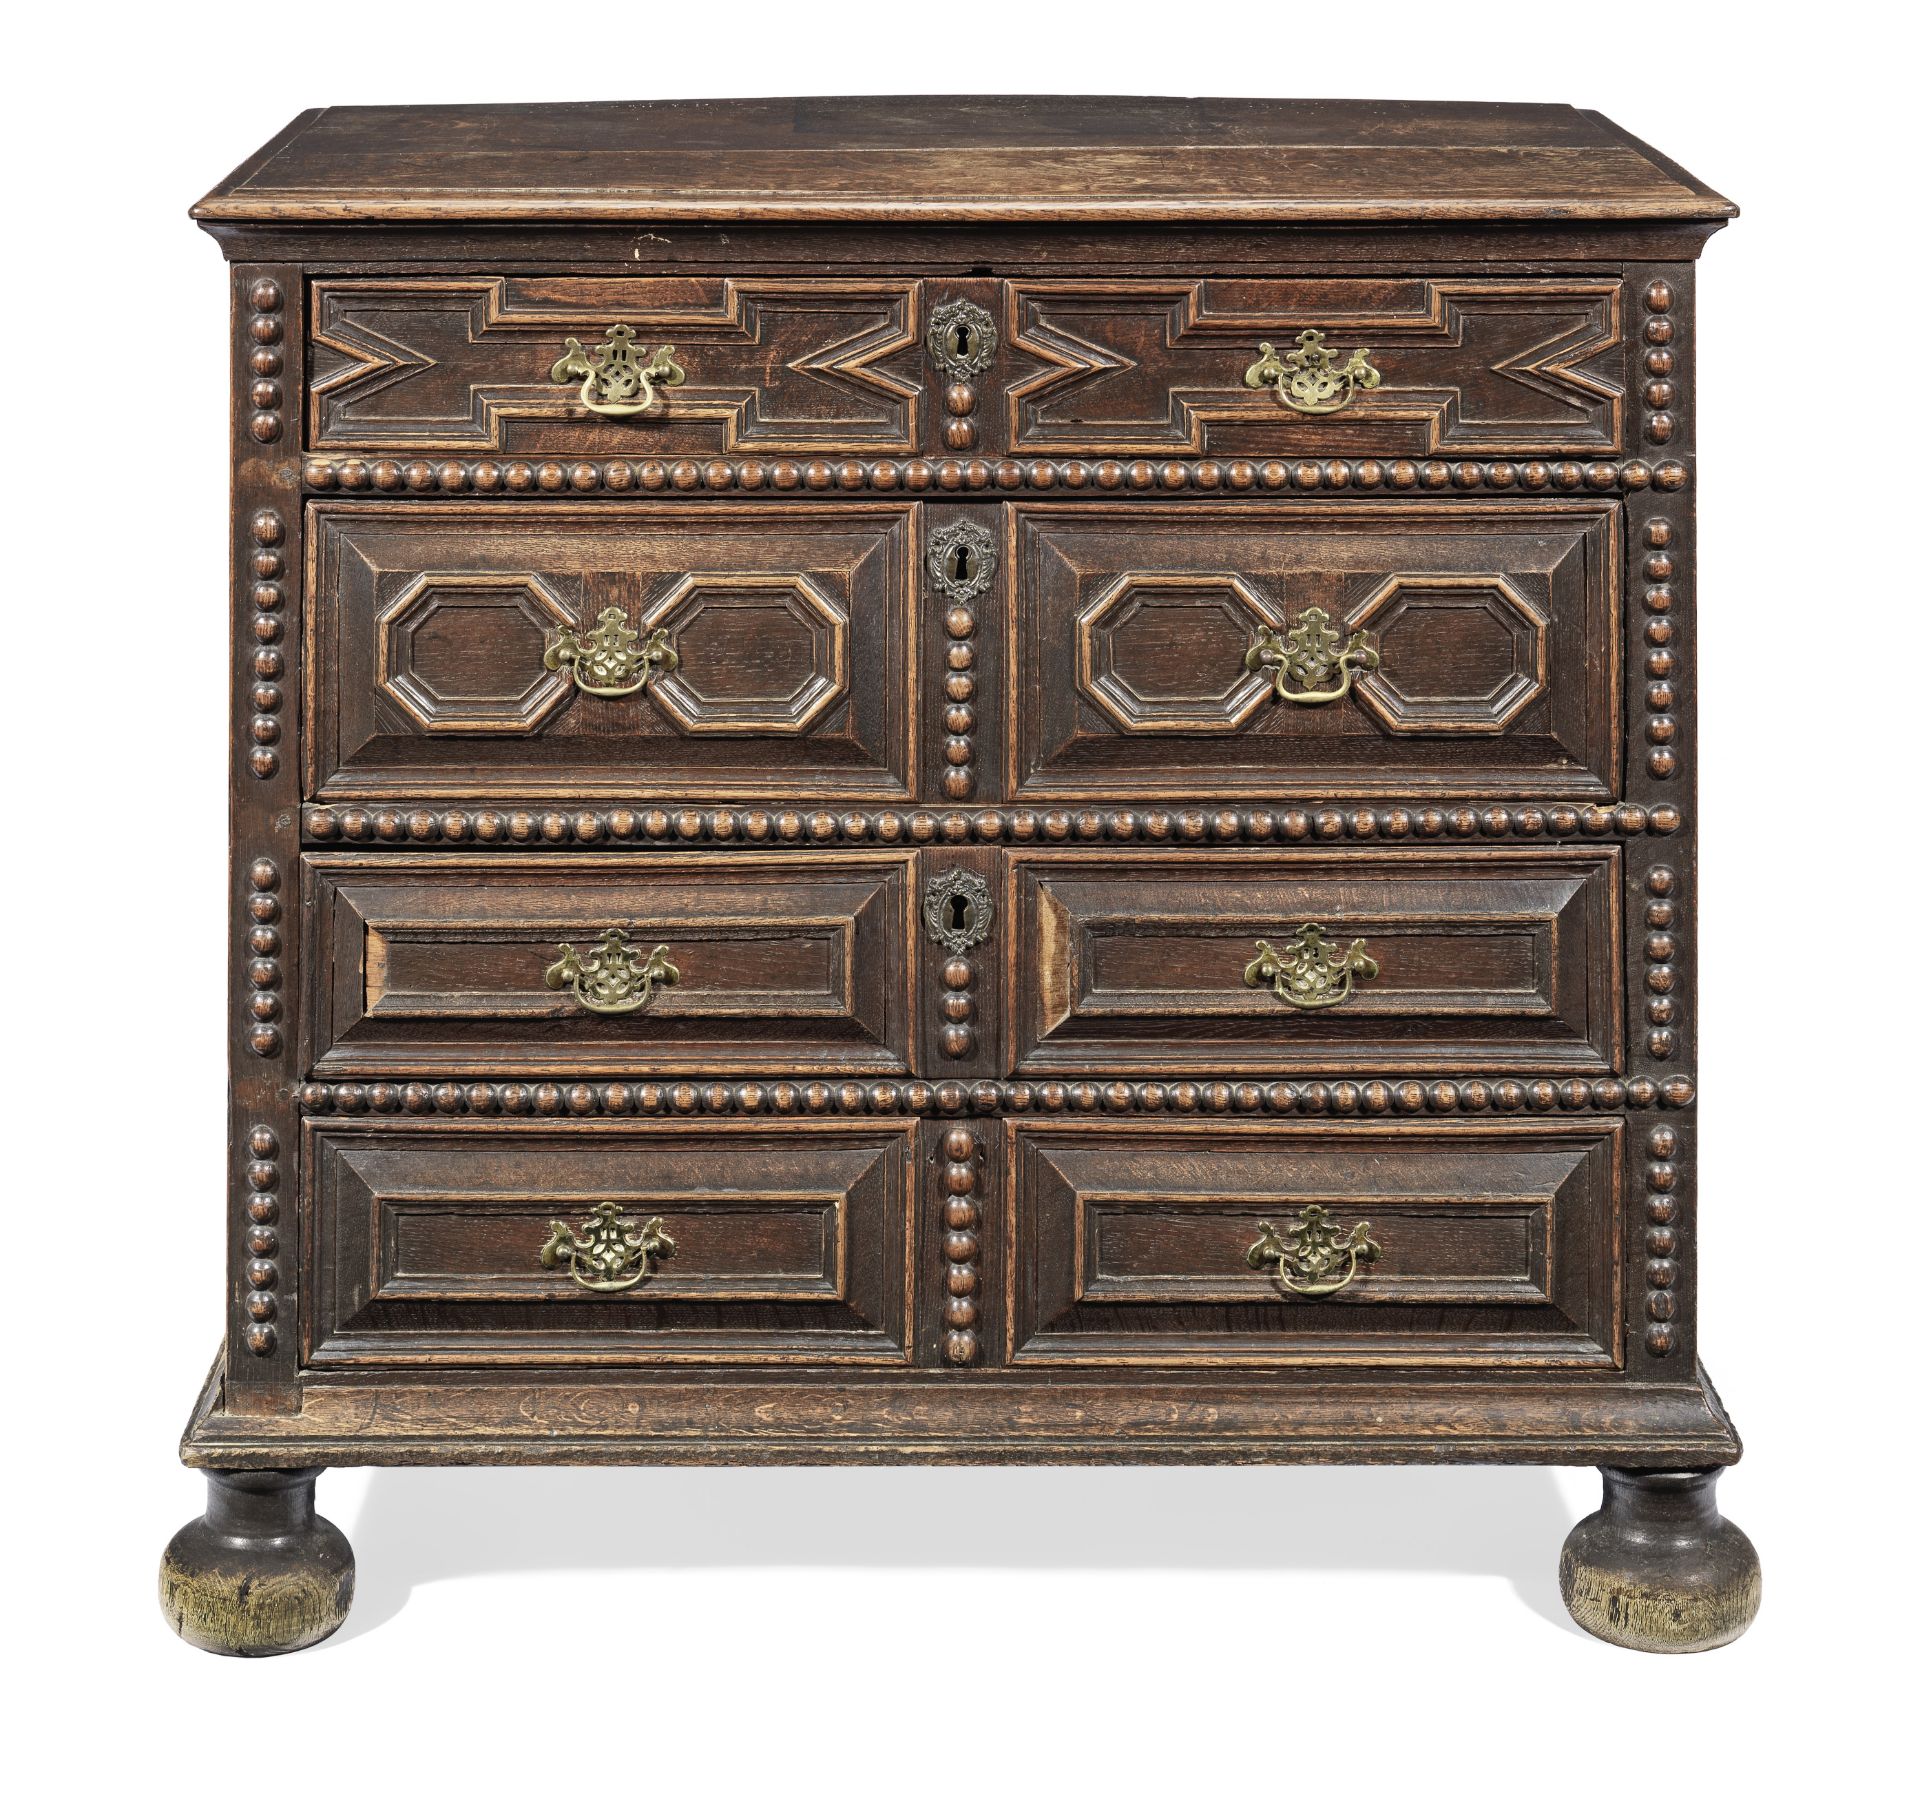 A Charles II joined oak chest of drawers, circa 1680